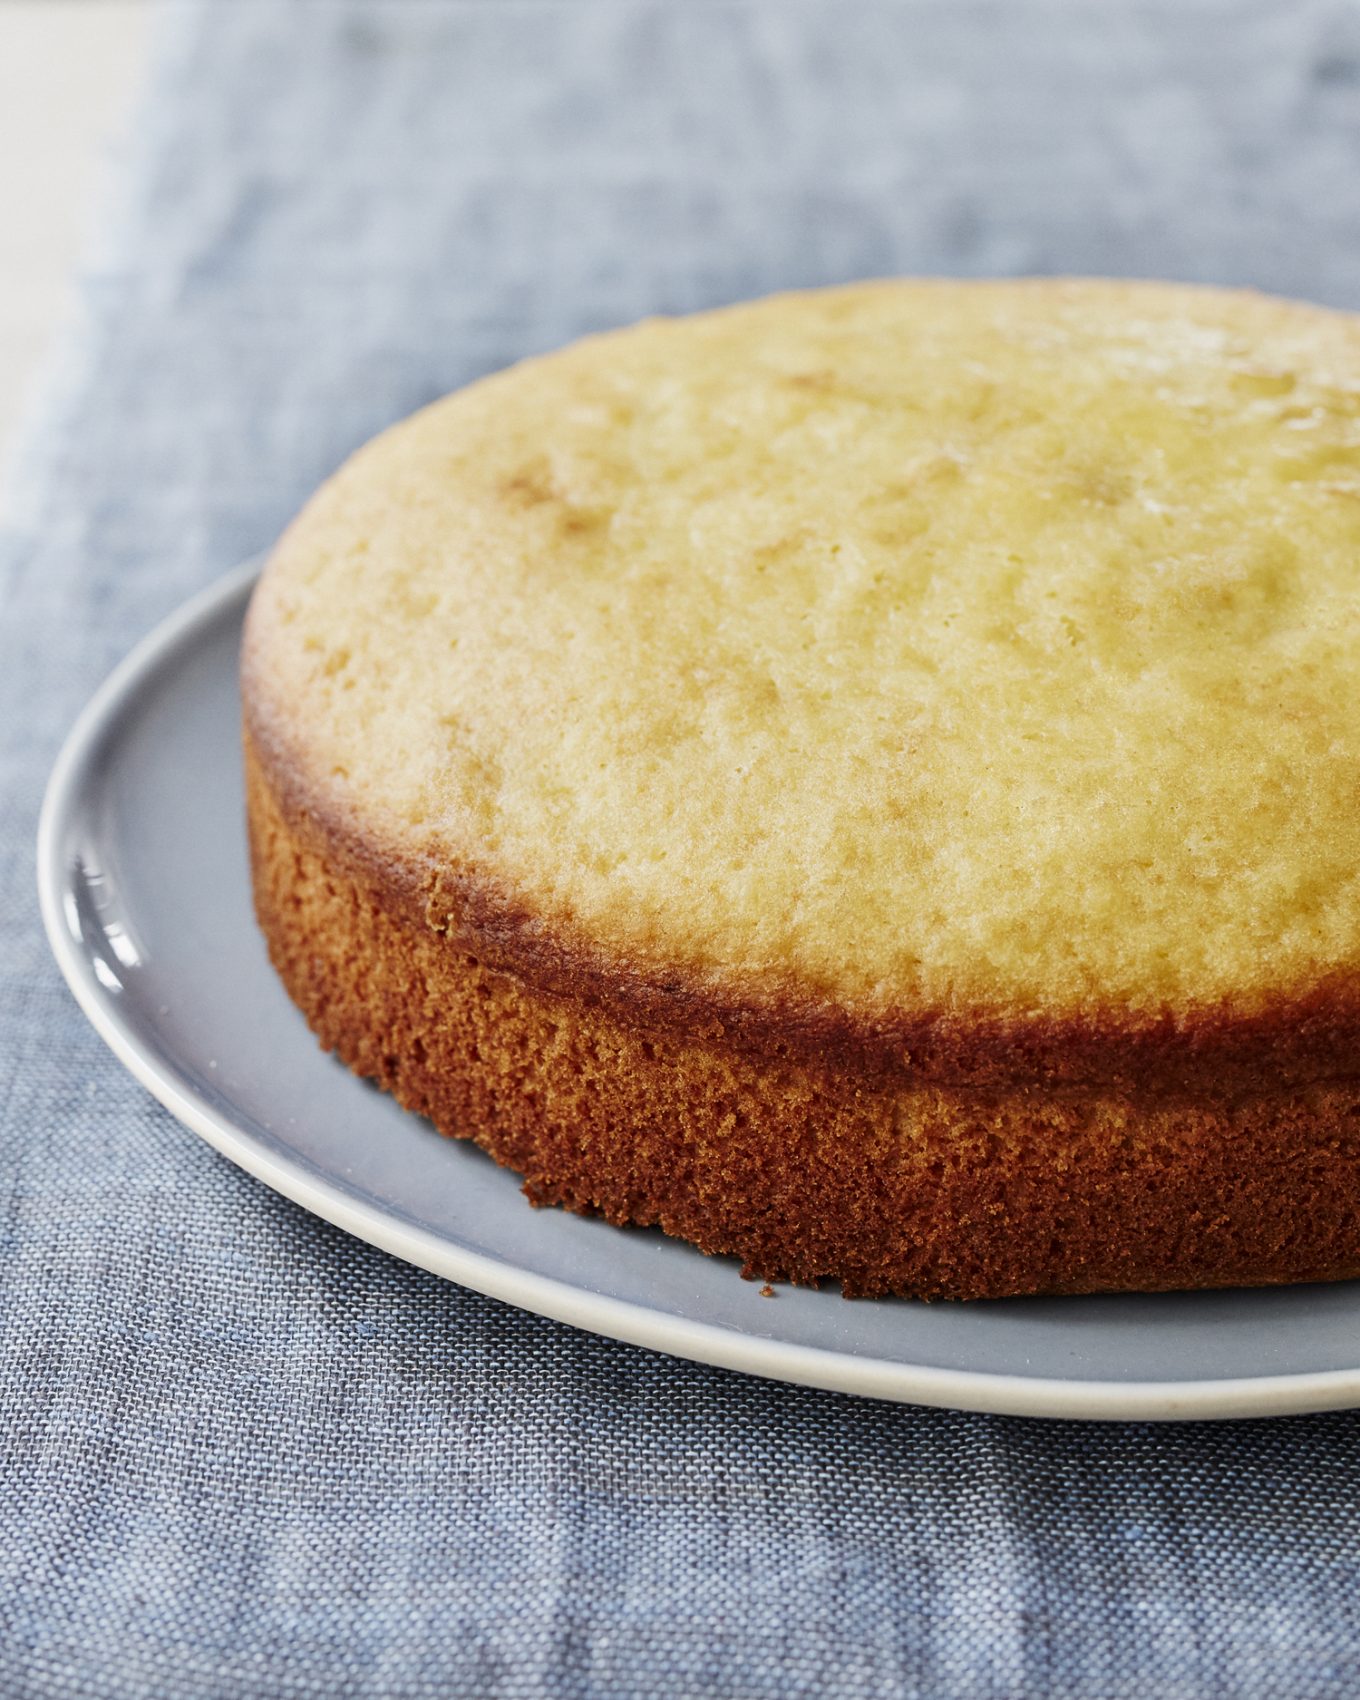 An olive oil cake, baked form Mark Bittman's &quot;How To Bake Everything&quot; cookbook. (Robert Bredvad / Houghton Mifflin Harcourt)